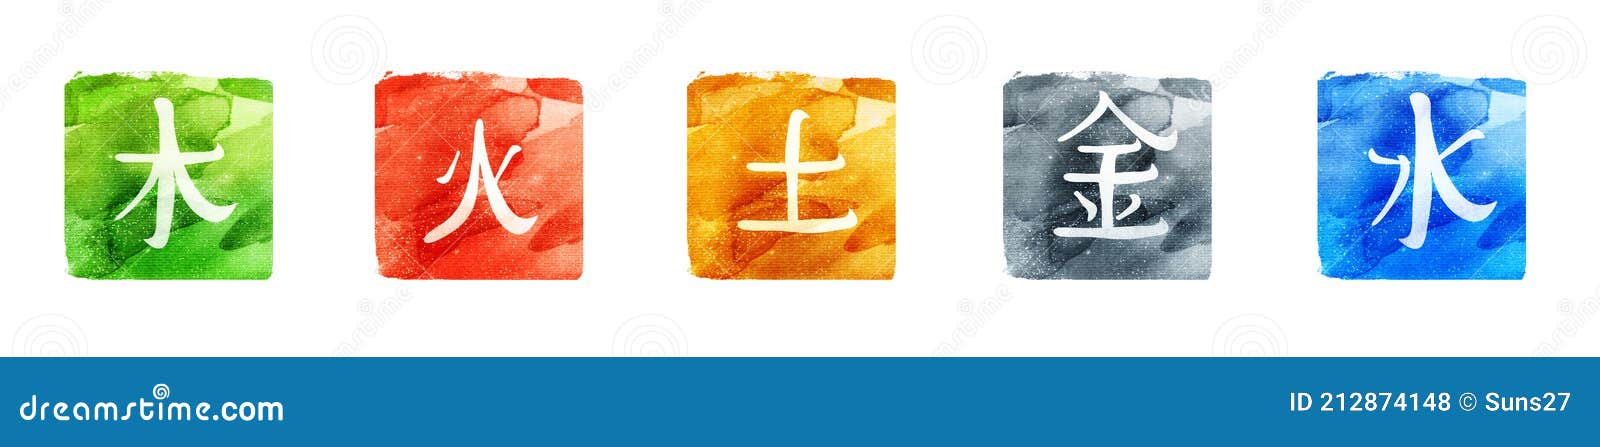 Set Of Watercolor Squares Backgrounds With Chinese Elements 库存照片 图片包括有和谐 查出